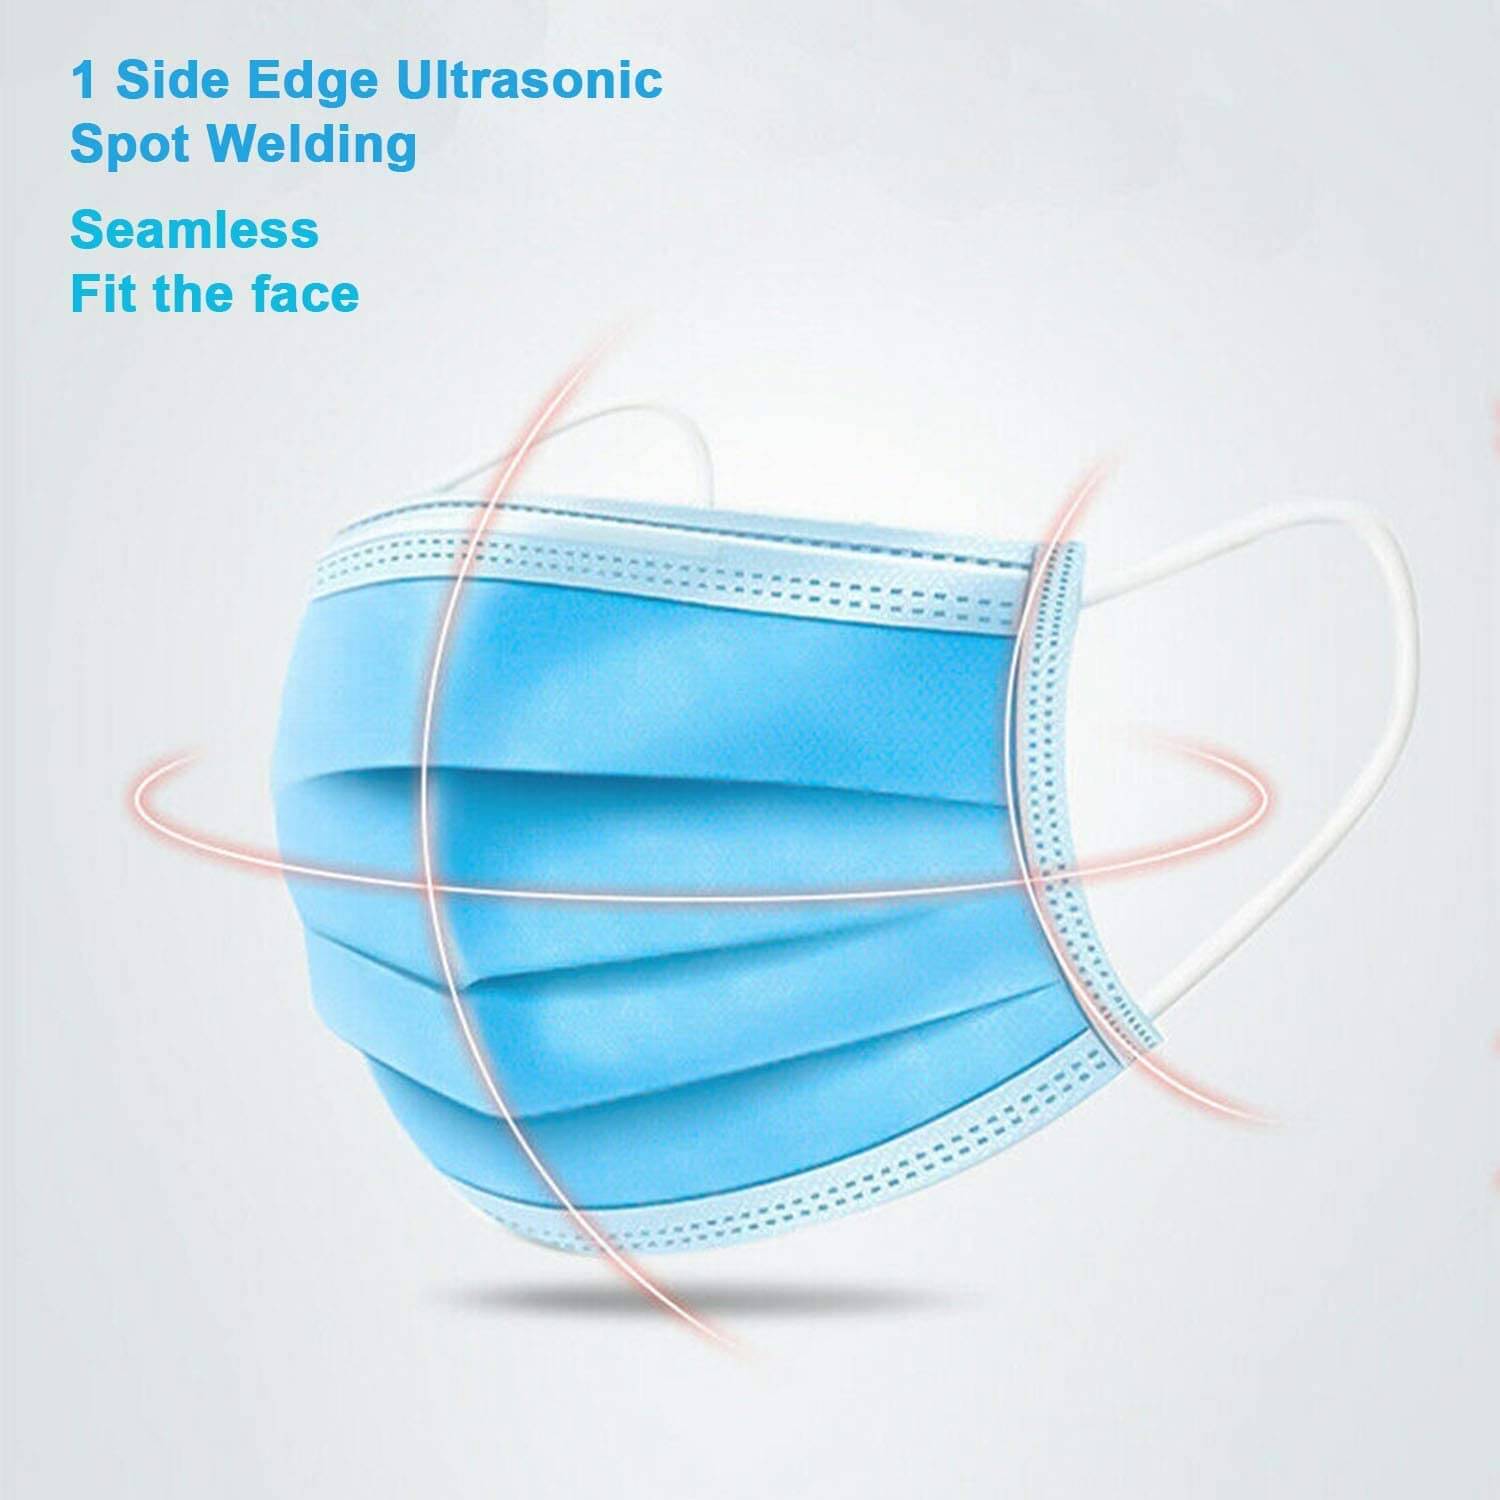 Surgical disposable mask